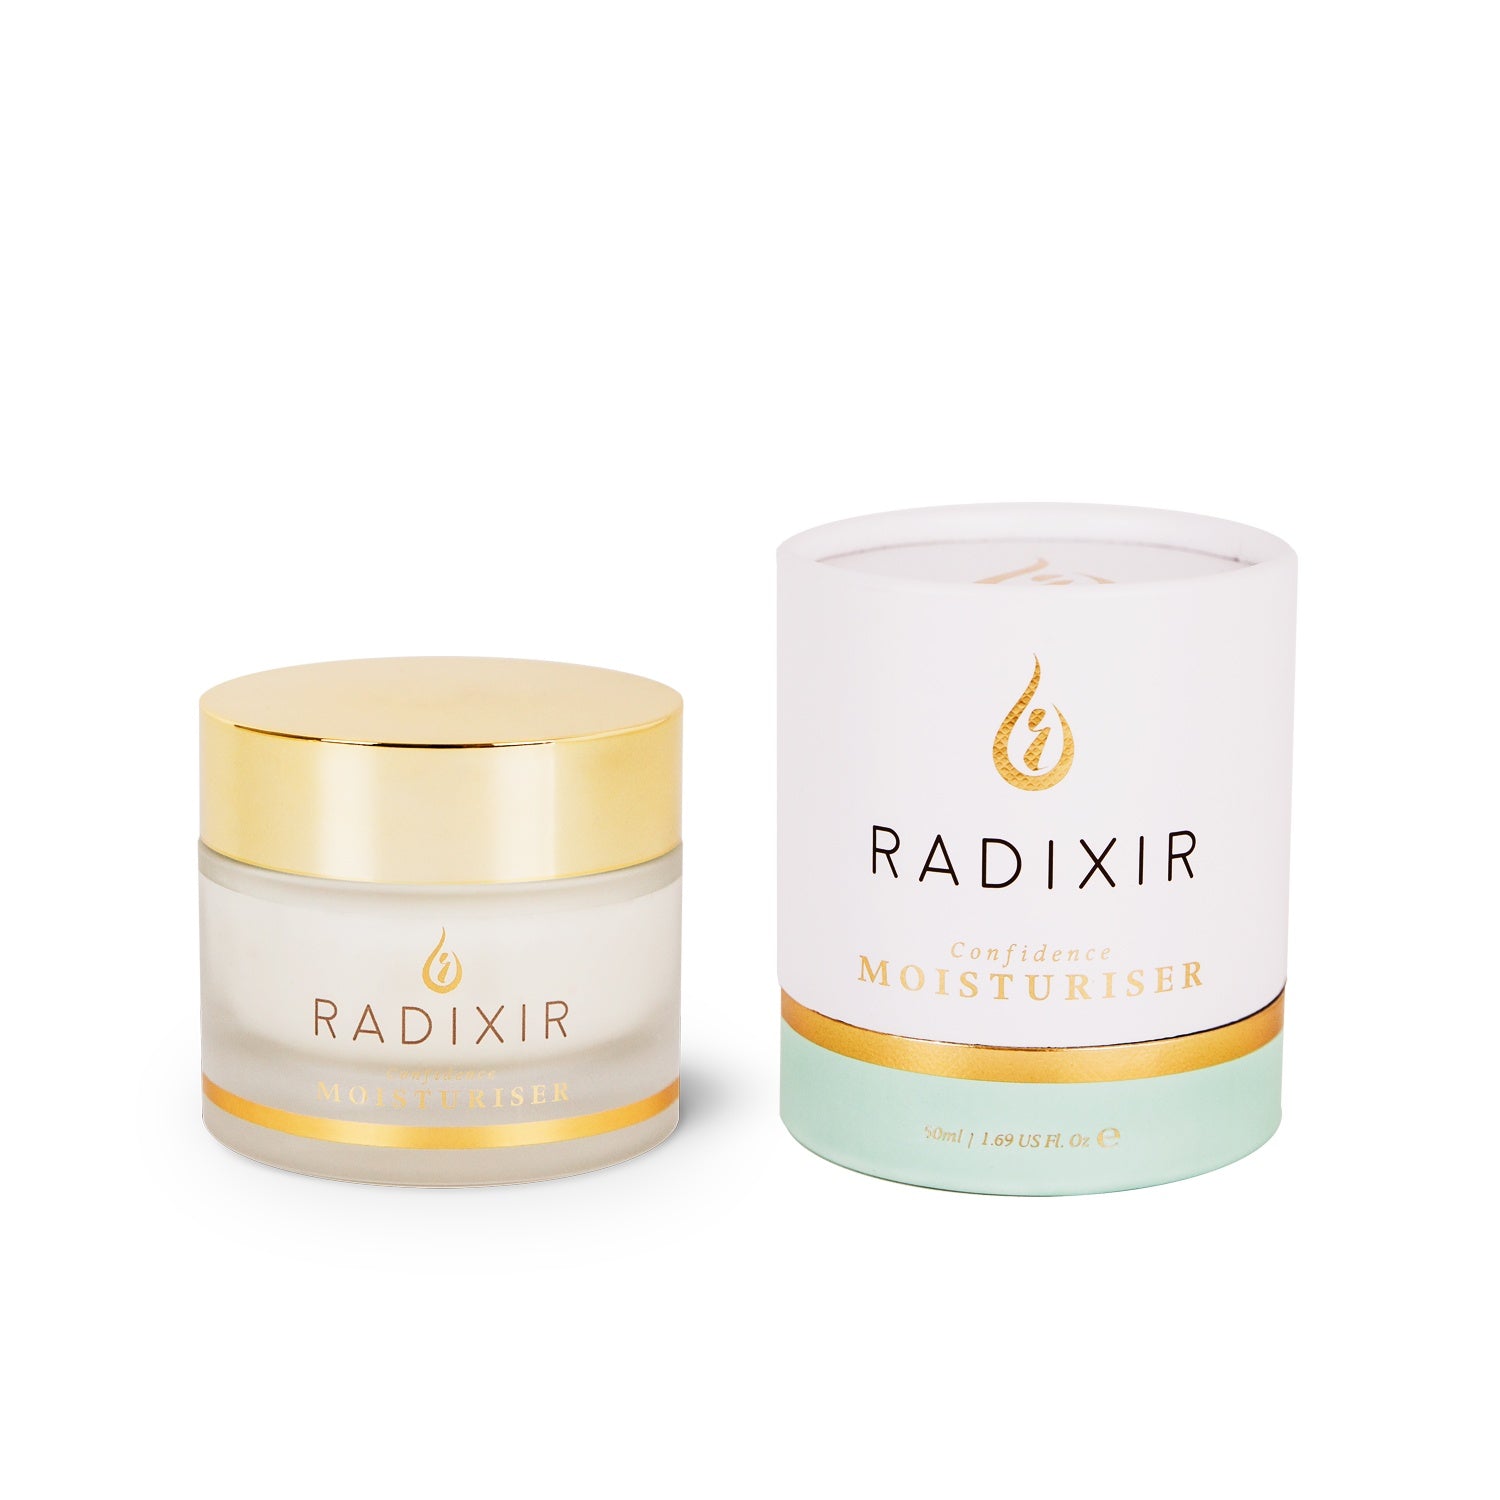 Radixir Natural Confidence Moisturizer Jar and Outer Packaging